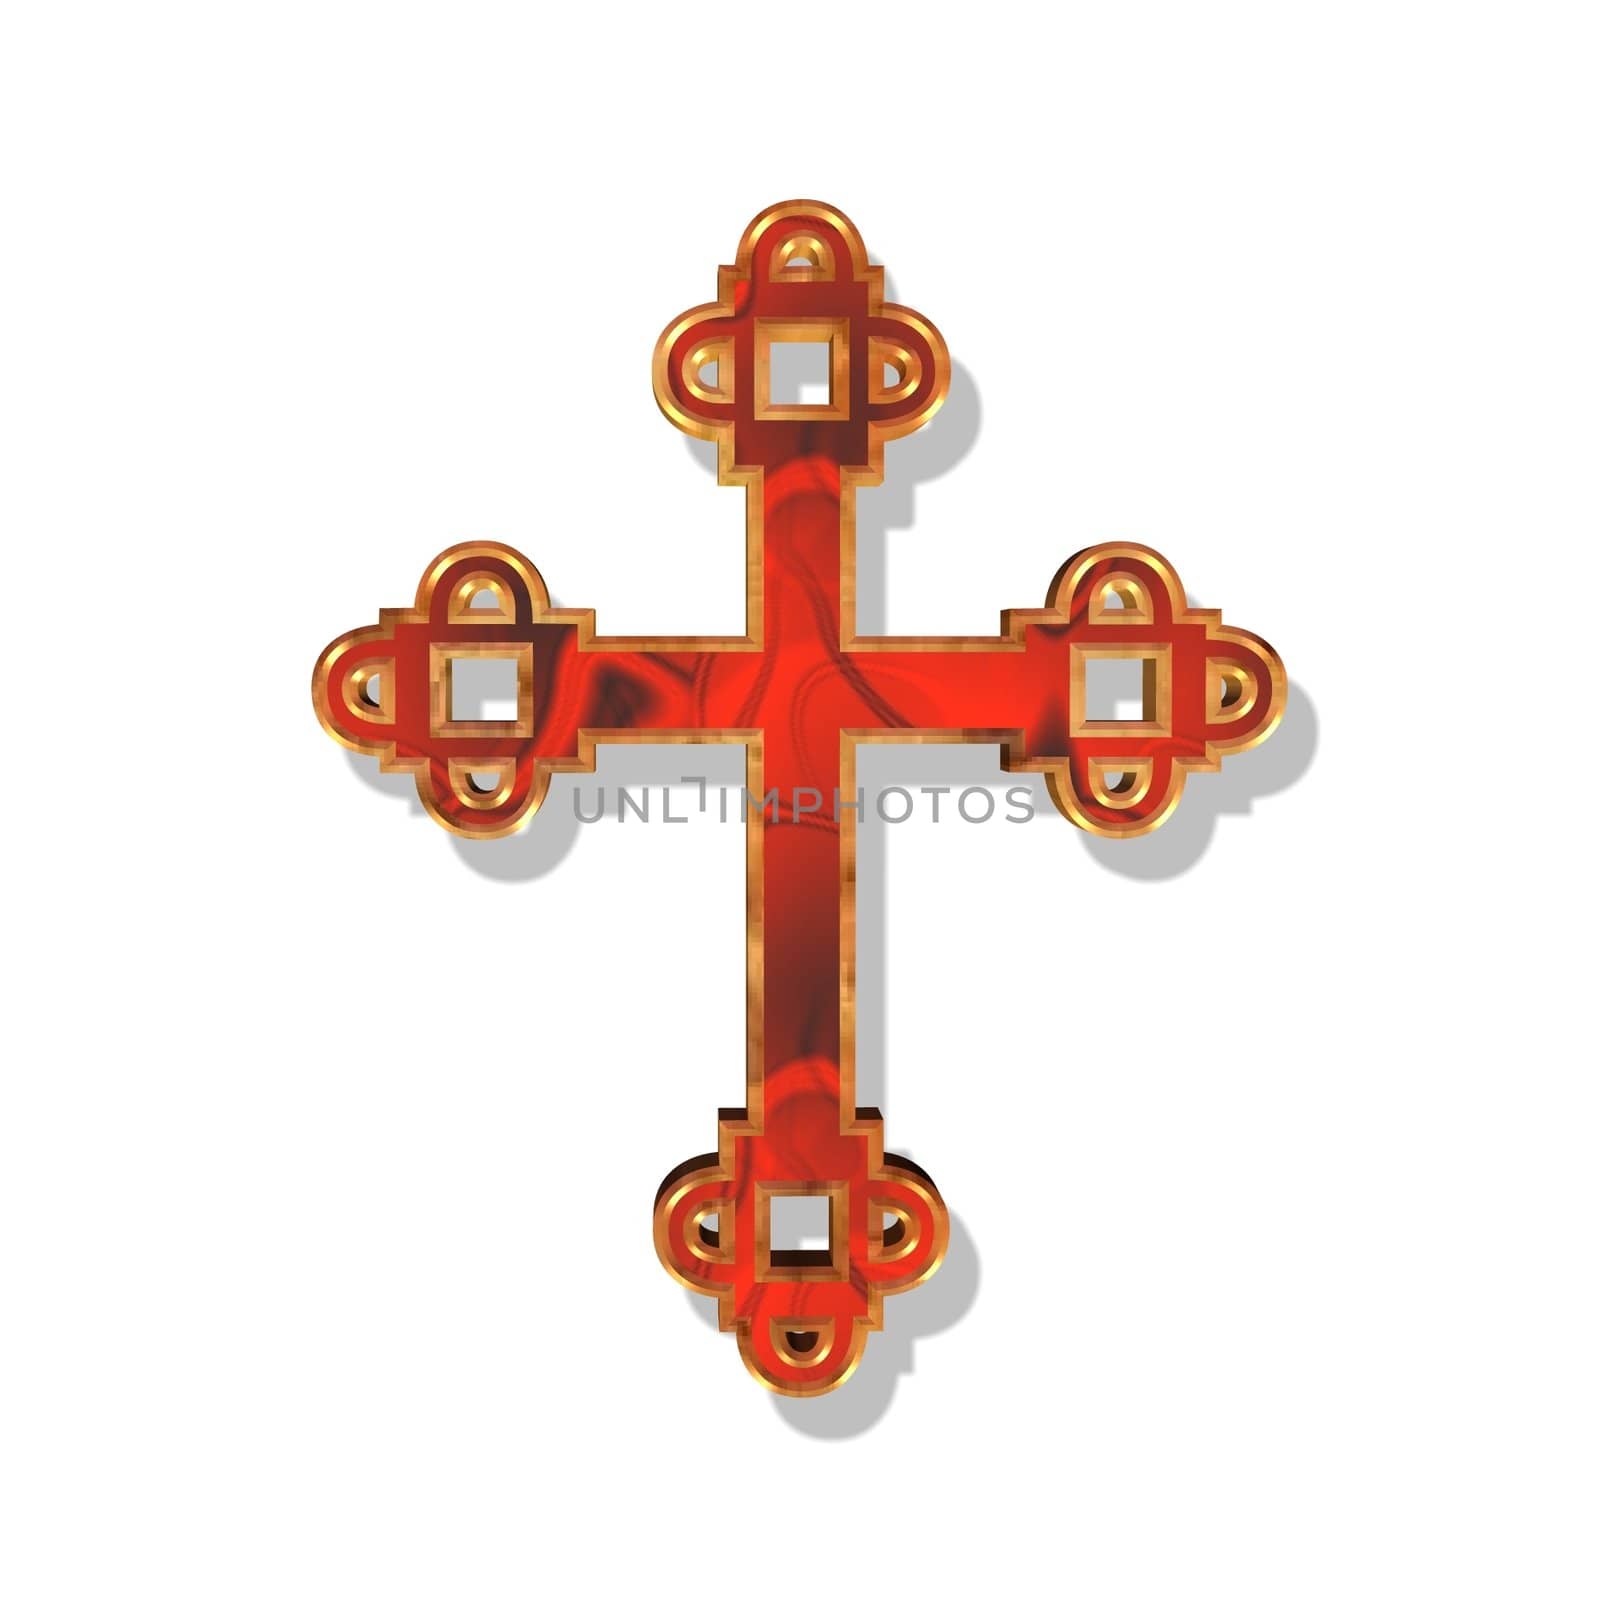 an illustration of a red and golden cross